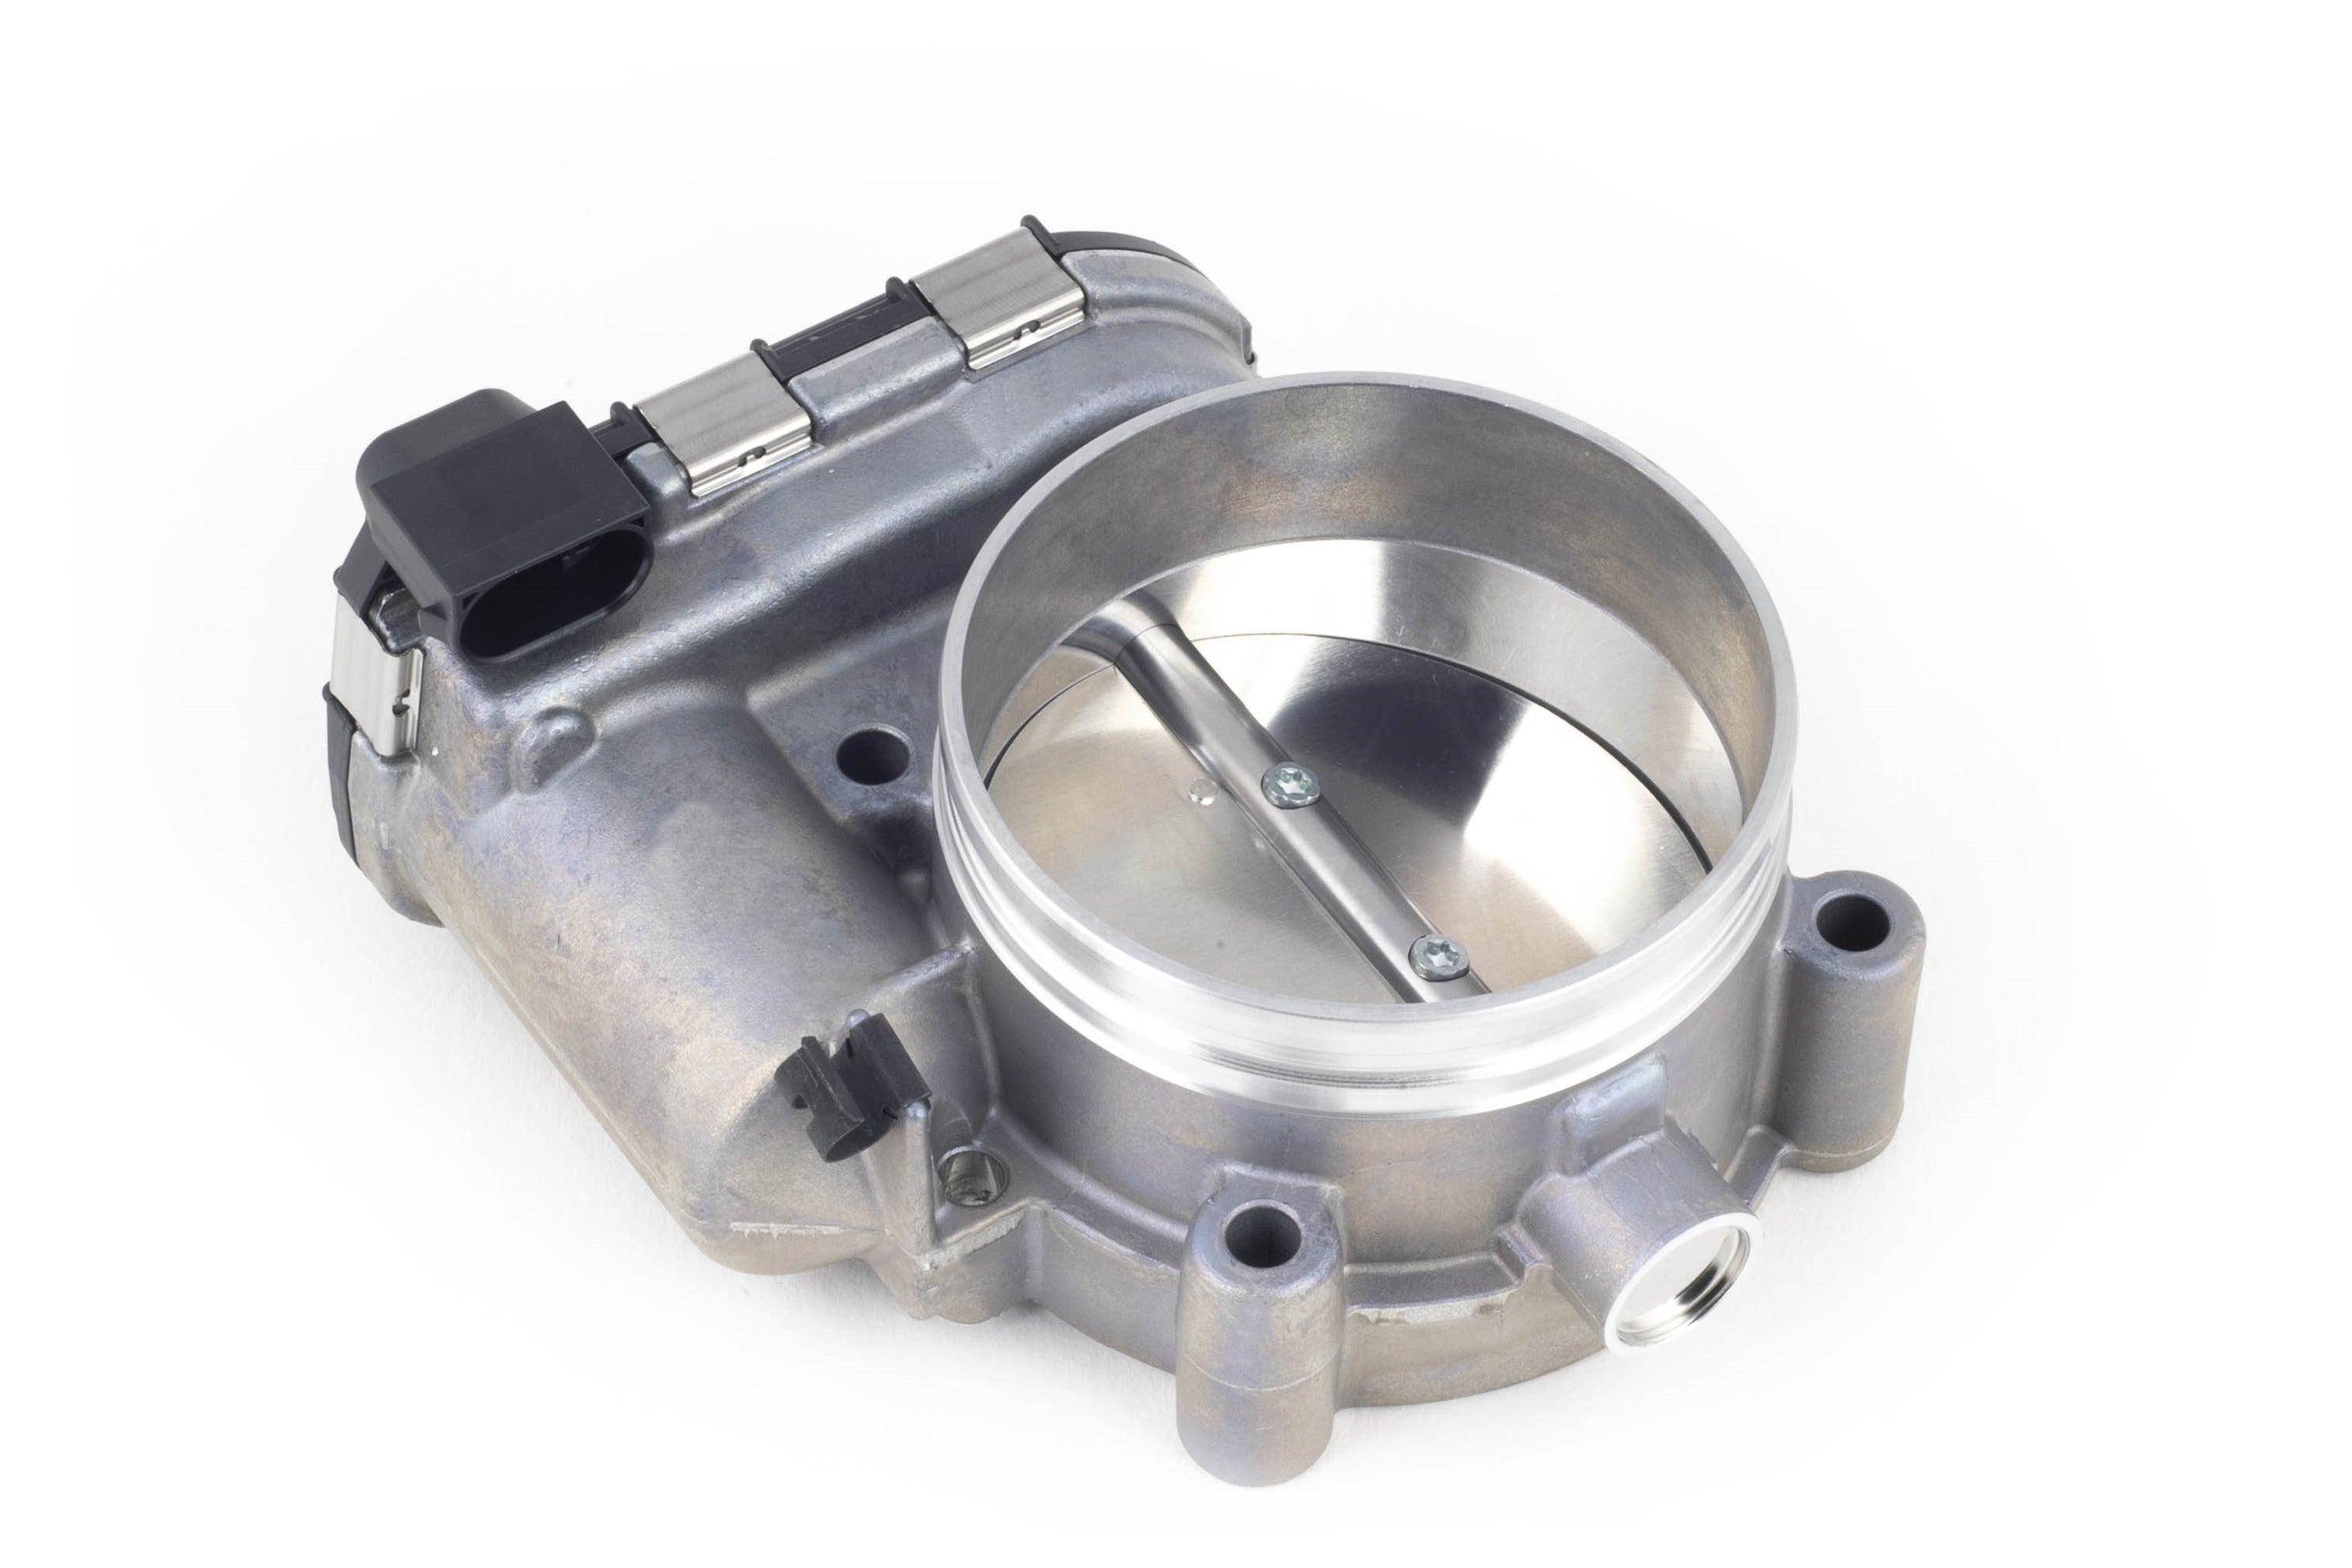 Haltech Bosch - 82mm Electronic Throttle Body - Includes connector and Pins - HT-011803